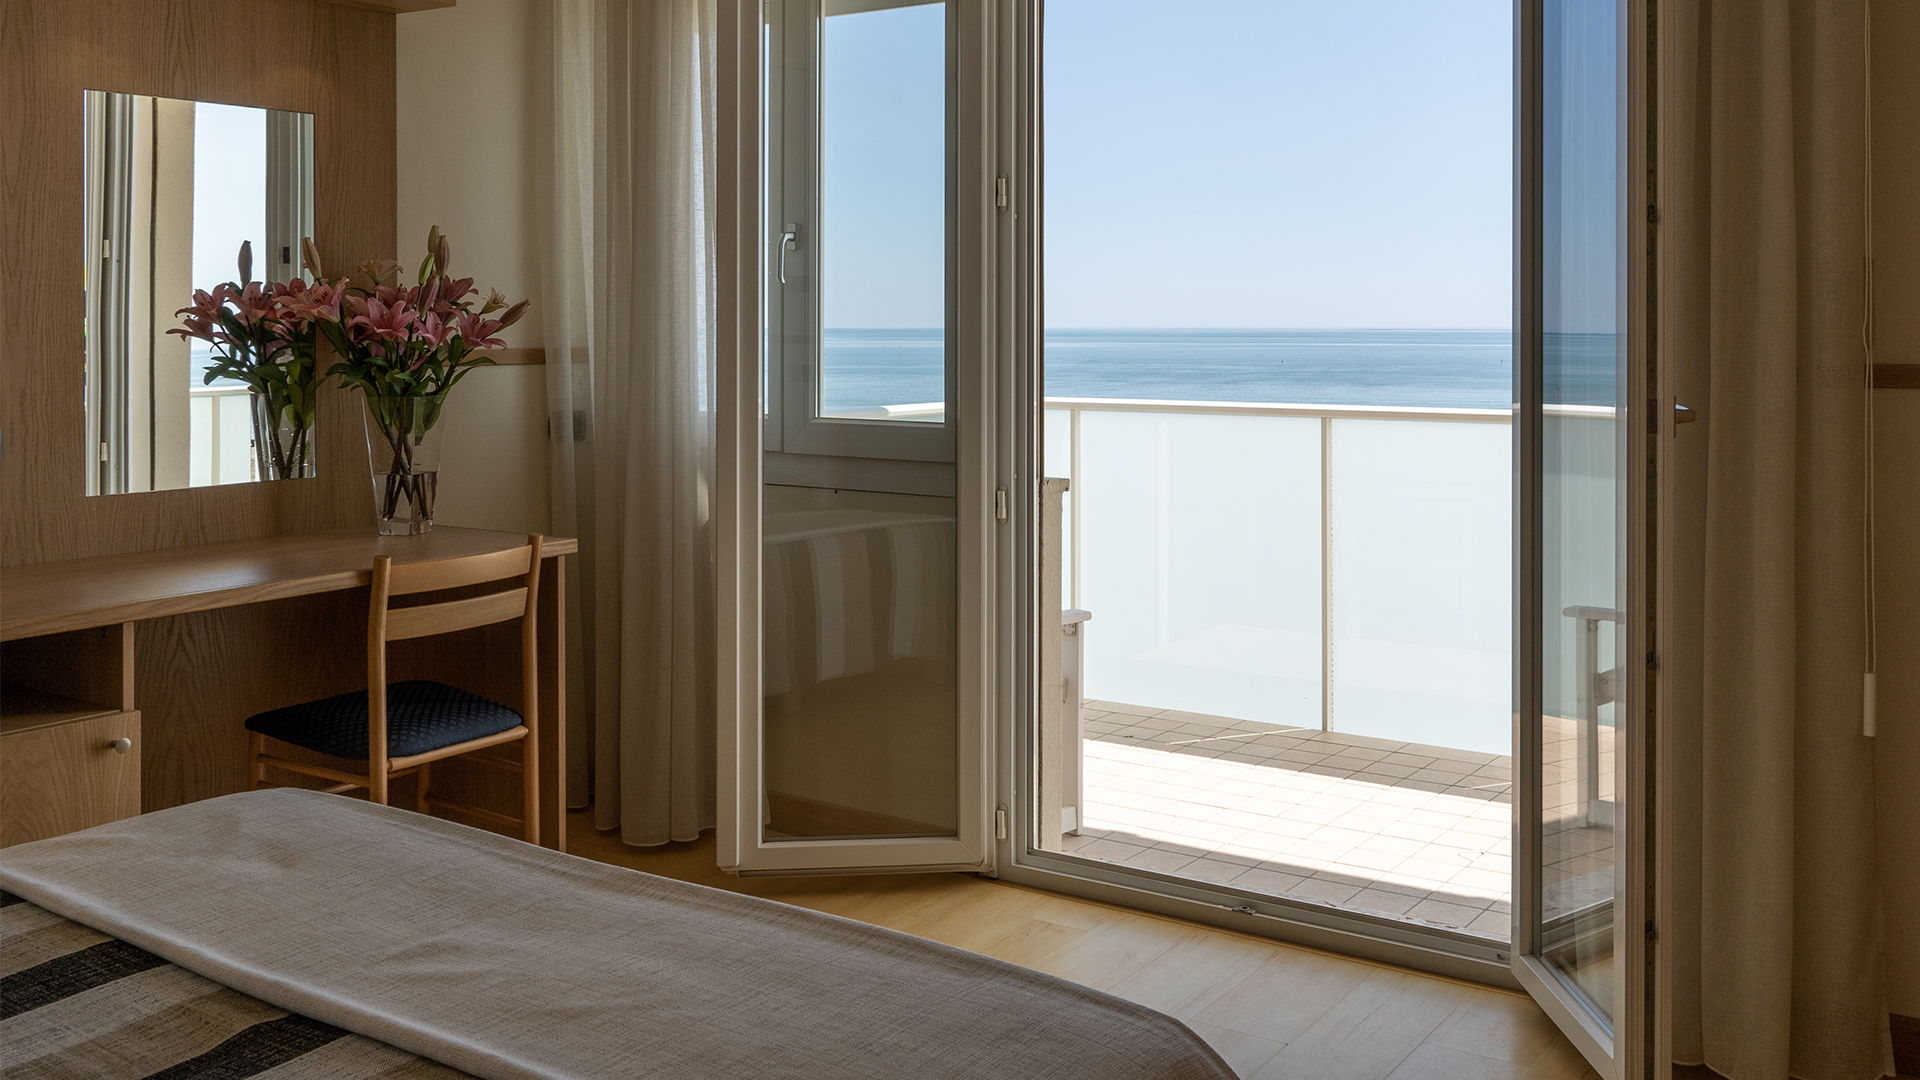 Three Bedded Room with Front Sea View